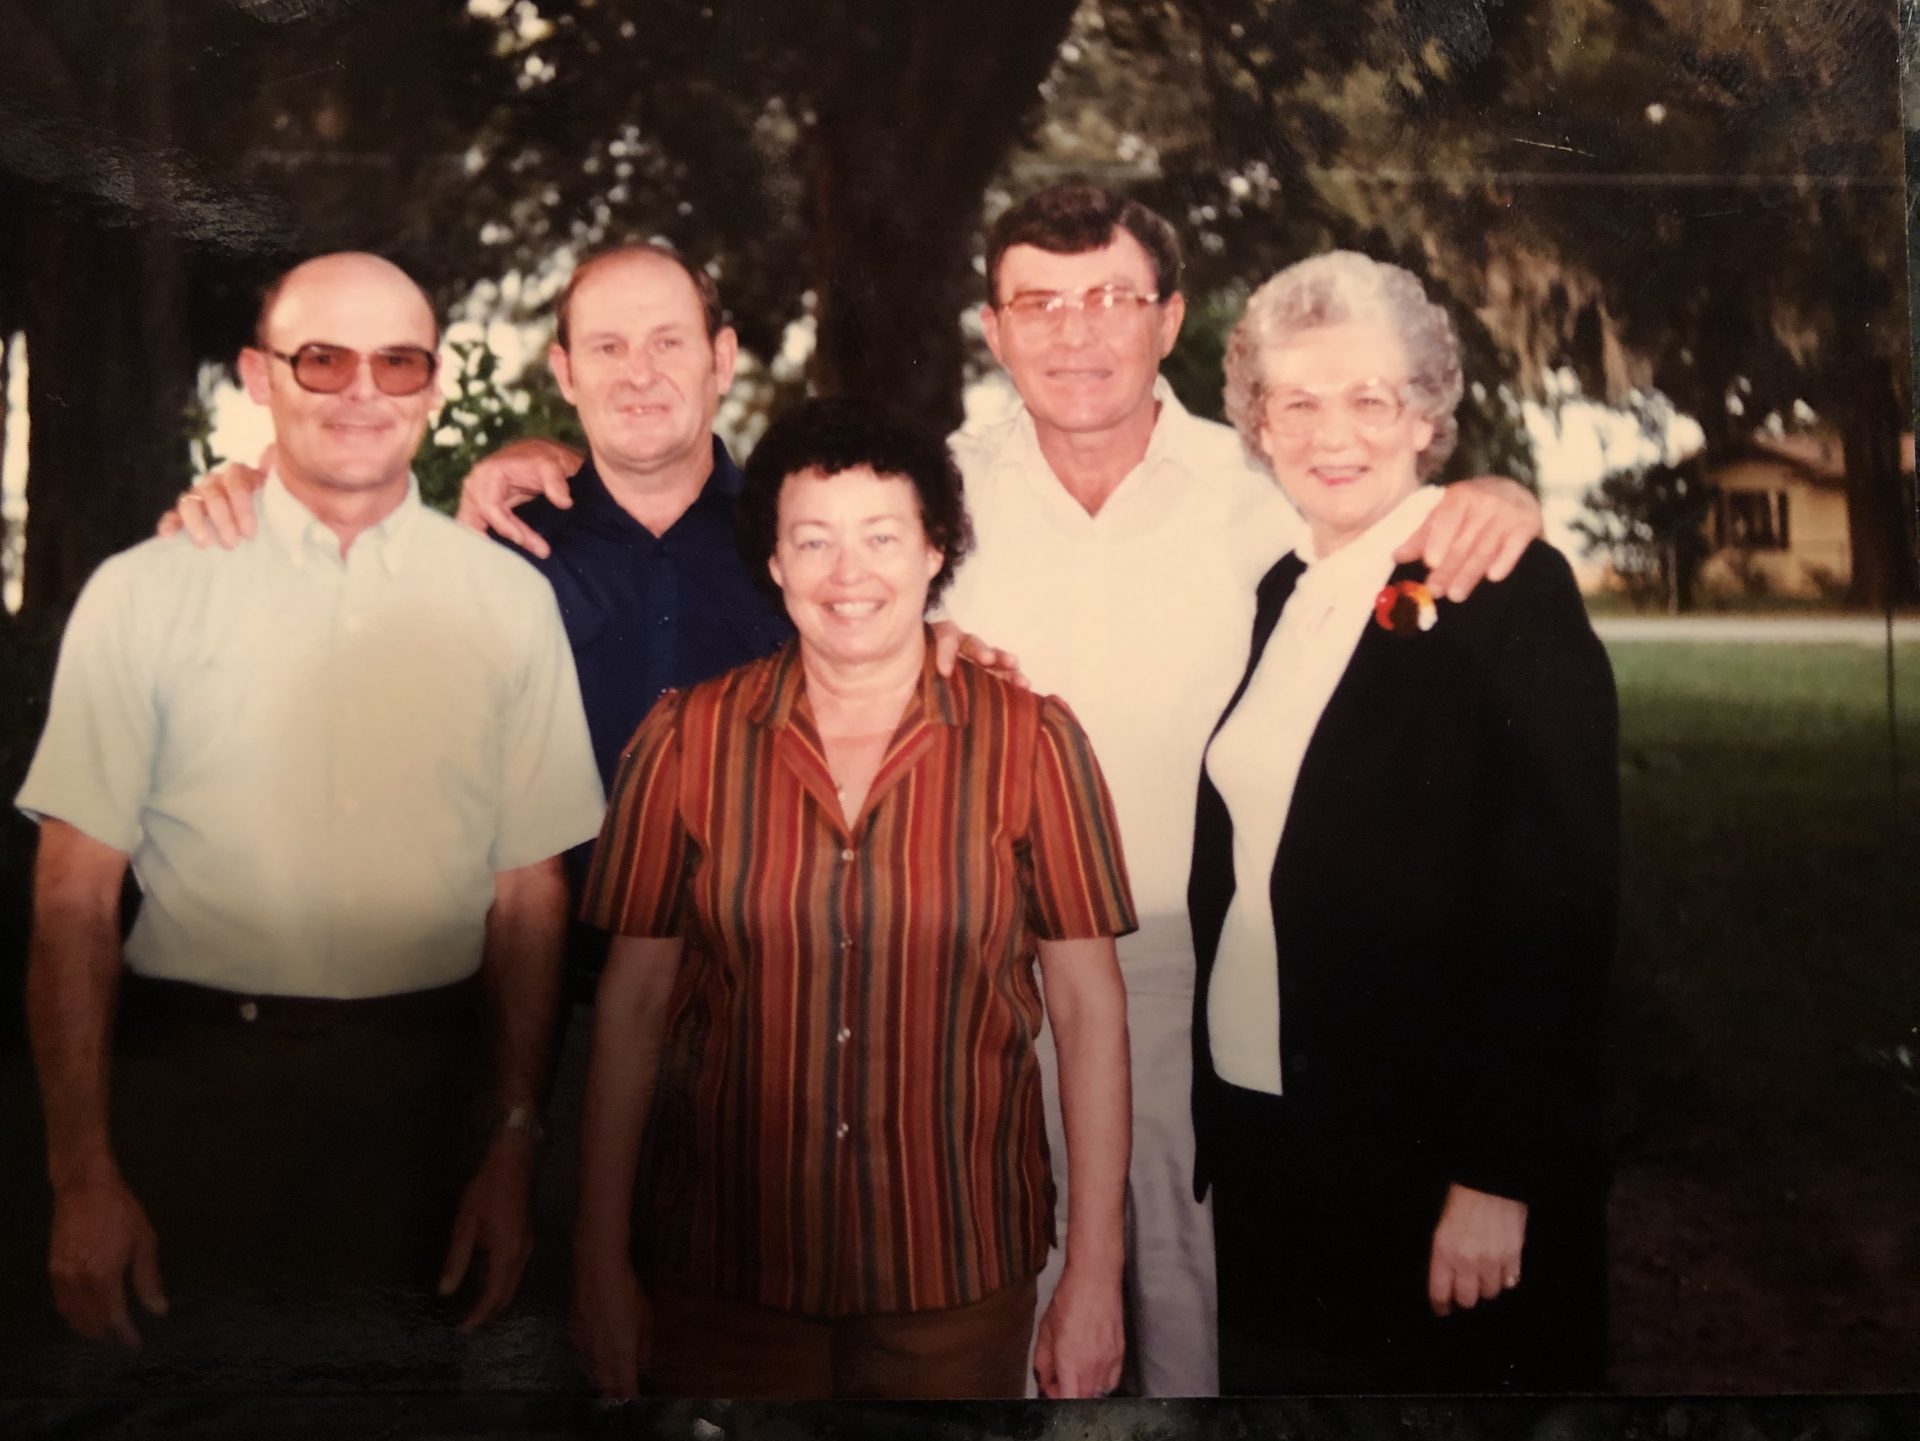 Gastfield Thanksgiving 1983.<br />
Penny with brothers Butch and Buzzy, sister Sarah and cousin Ruth.